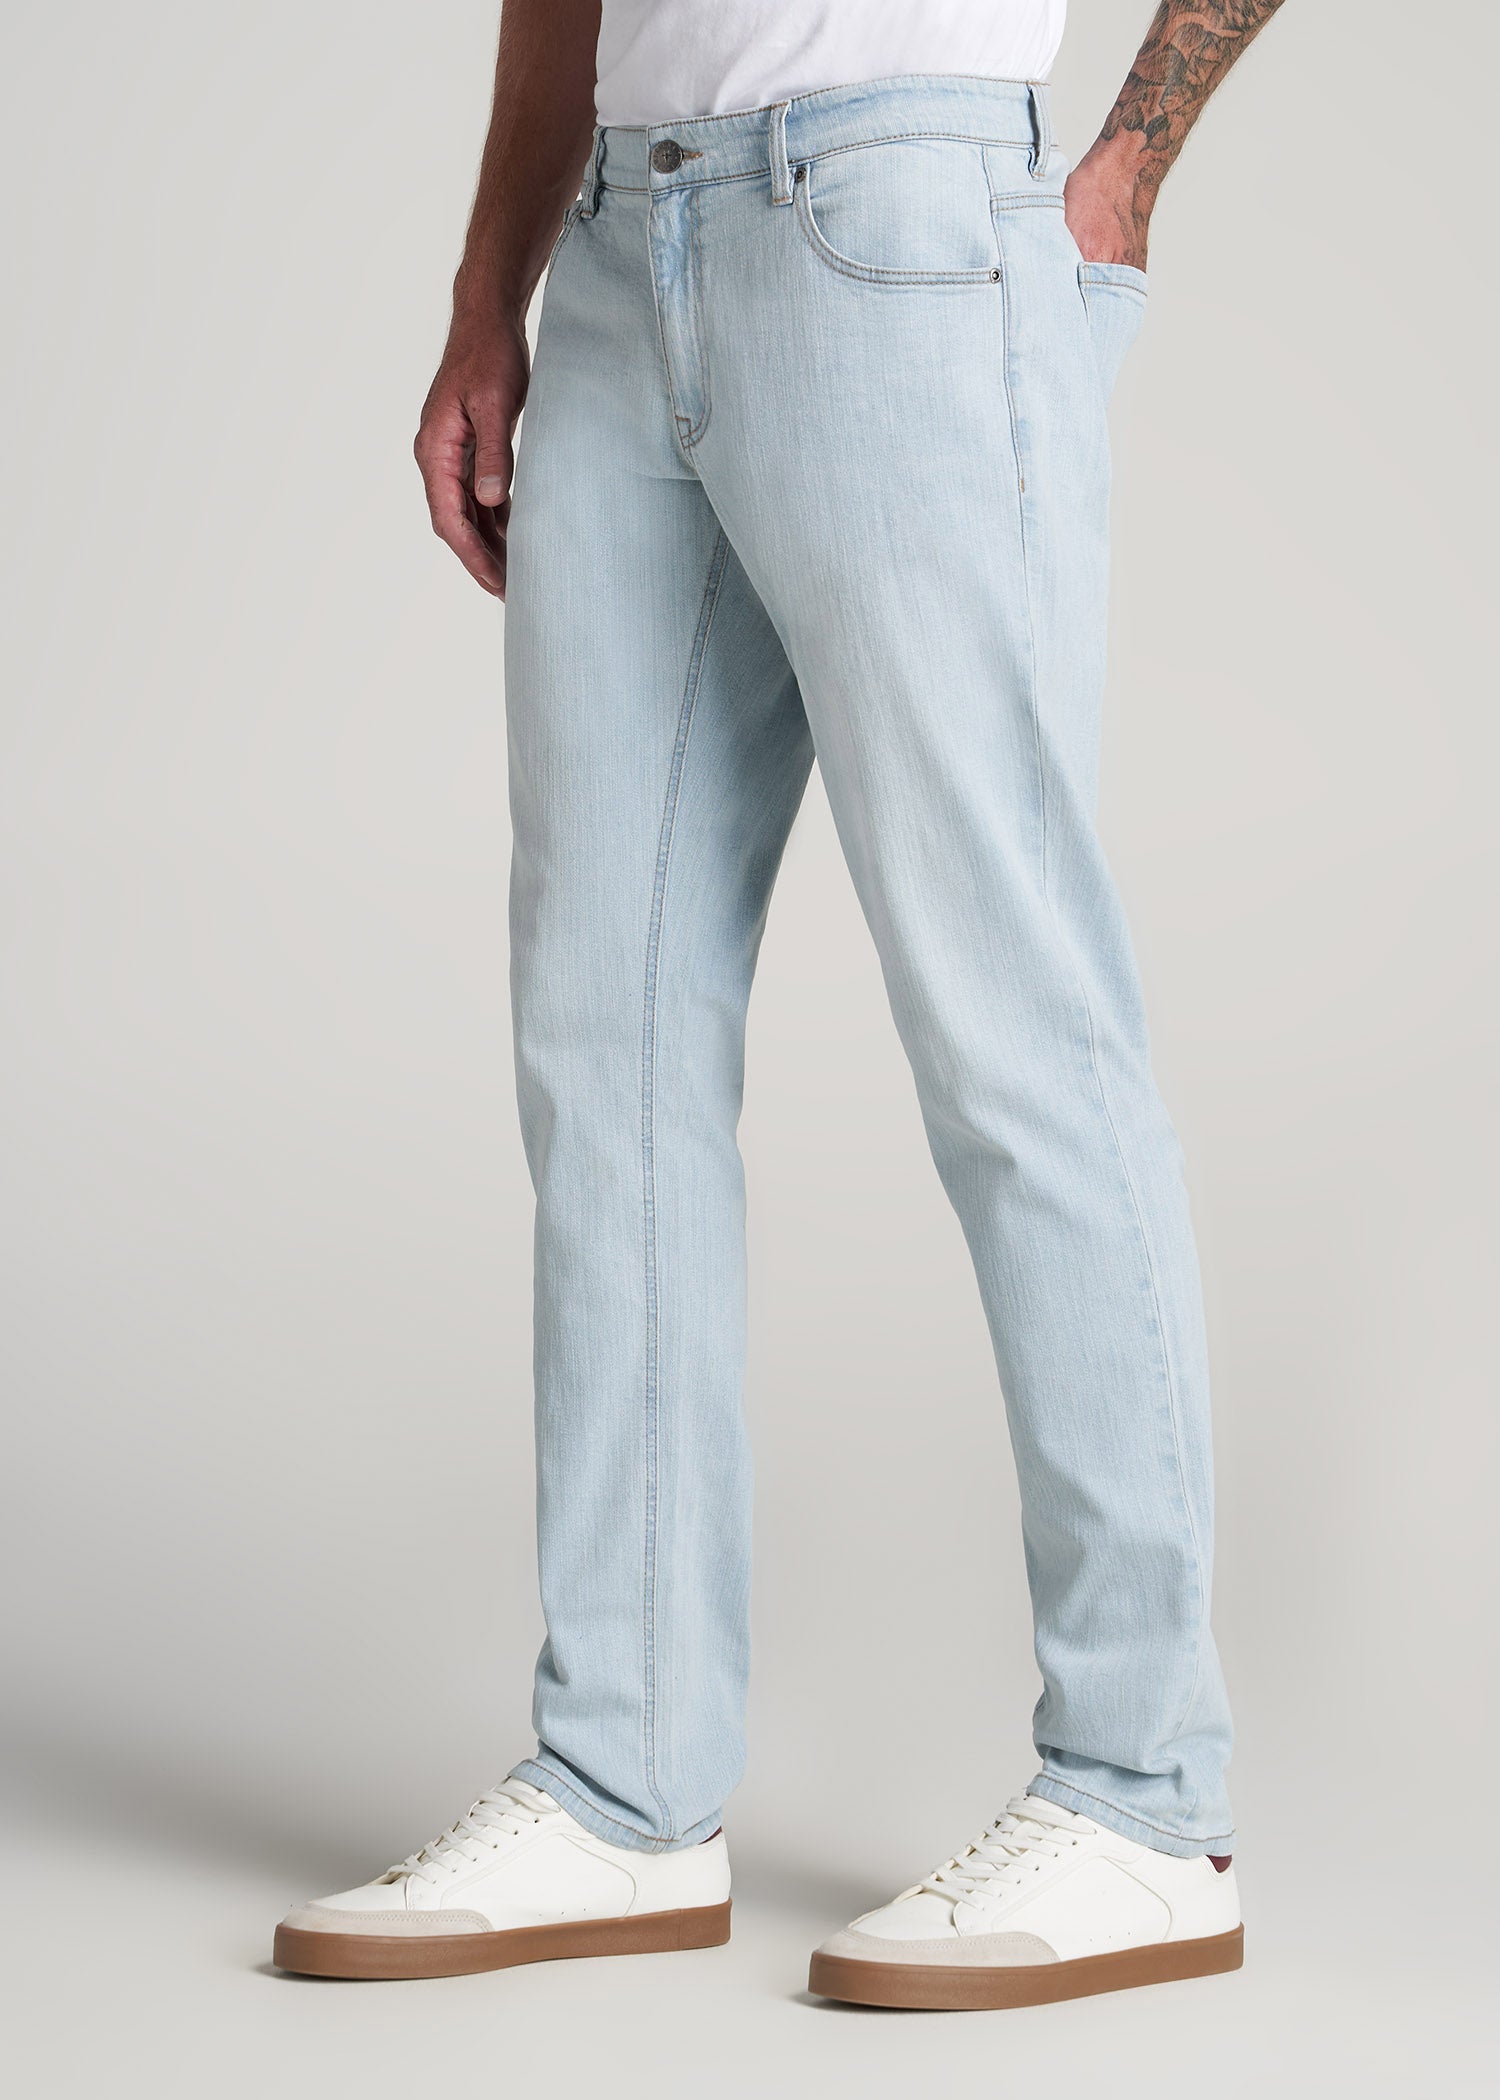    American-Tall-Men-Carman-Tapered-Fit-Jeans-California-Blue-side